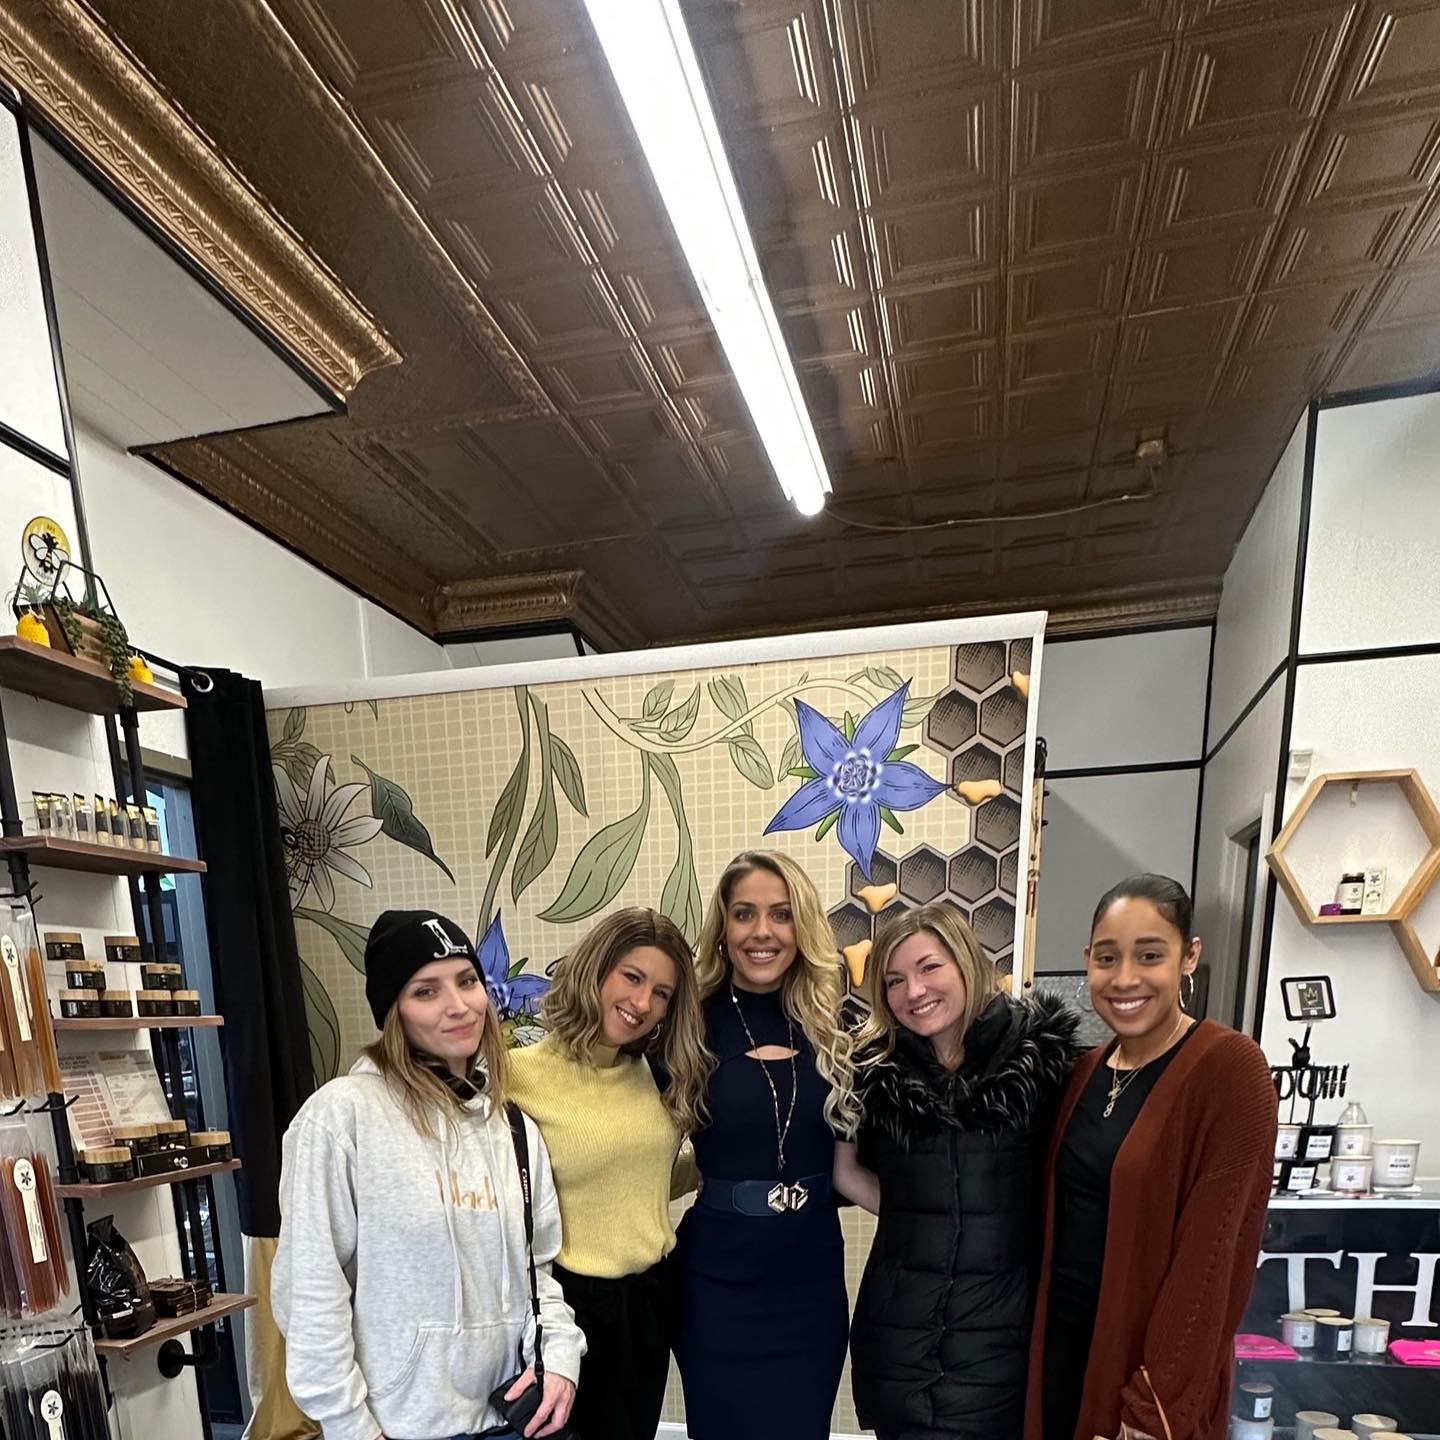 🍯Have you buzzed by @thehive585 yet ❓ 

We are located @ 272 N. Winton Rd. in the north winton village of Rochester New York and open Wednesday-Sunday. Visit The Hive Beetique google listing for spring hours❗️

Shop our sweet collection of local and specially curated goods. 🤗 

Some of my favorite beautiful souls and moments from @thehive585 grand opening last month 🥰 more coming this week 📸💙 

I still can’t thank everyone enough for your continued support and love. 🙏🏼

You bring more sweetness inside the hive and I’m so blessed and thankful to share it with you all❗️🍯😍

#thehive585 #hivebeetique #hintofher #reyescollective #rochesterny #585 #shoplocal #supportsmallbusiness #hometown #localhoney #localbrands #speciallycurated